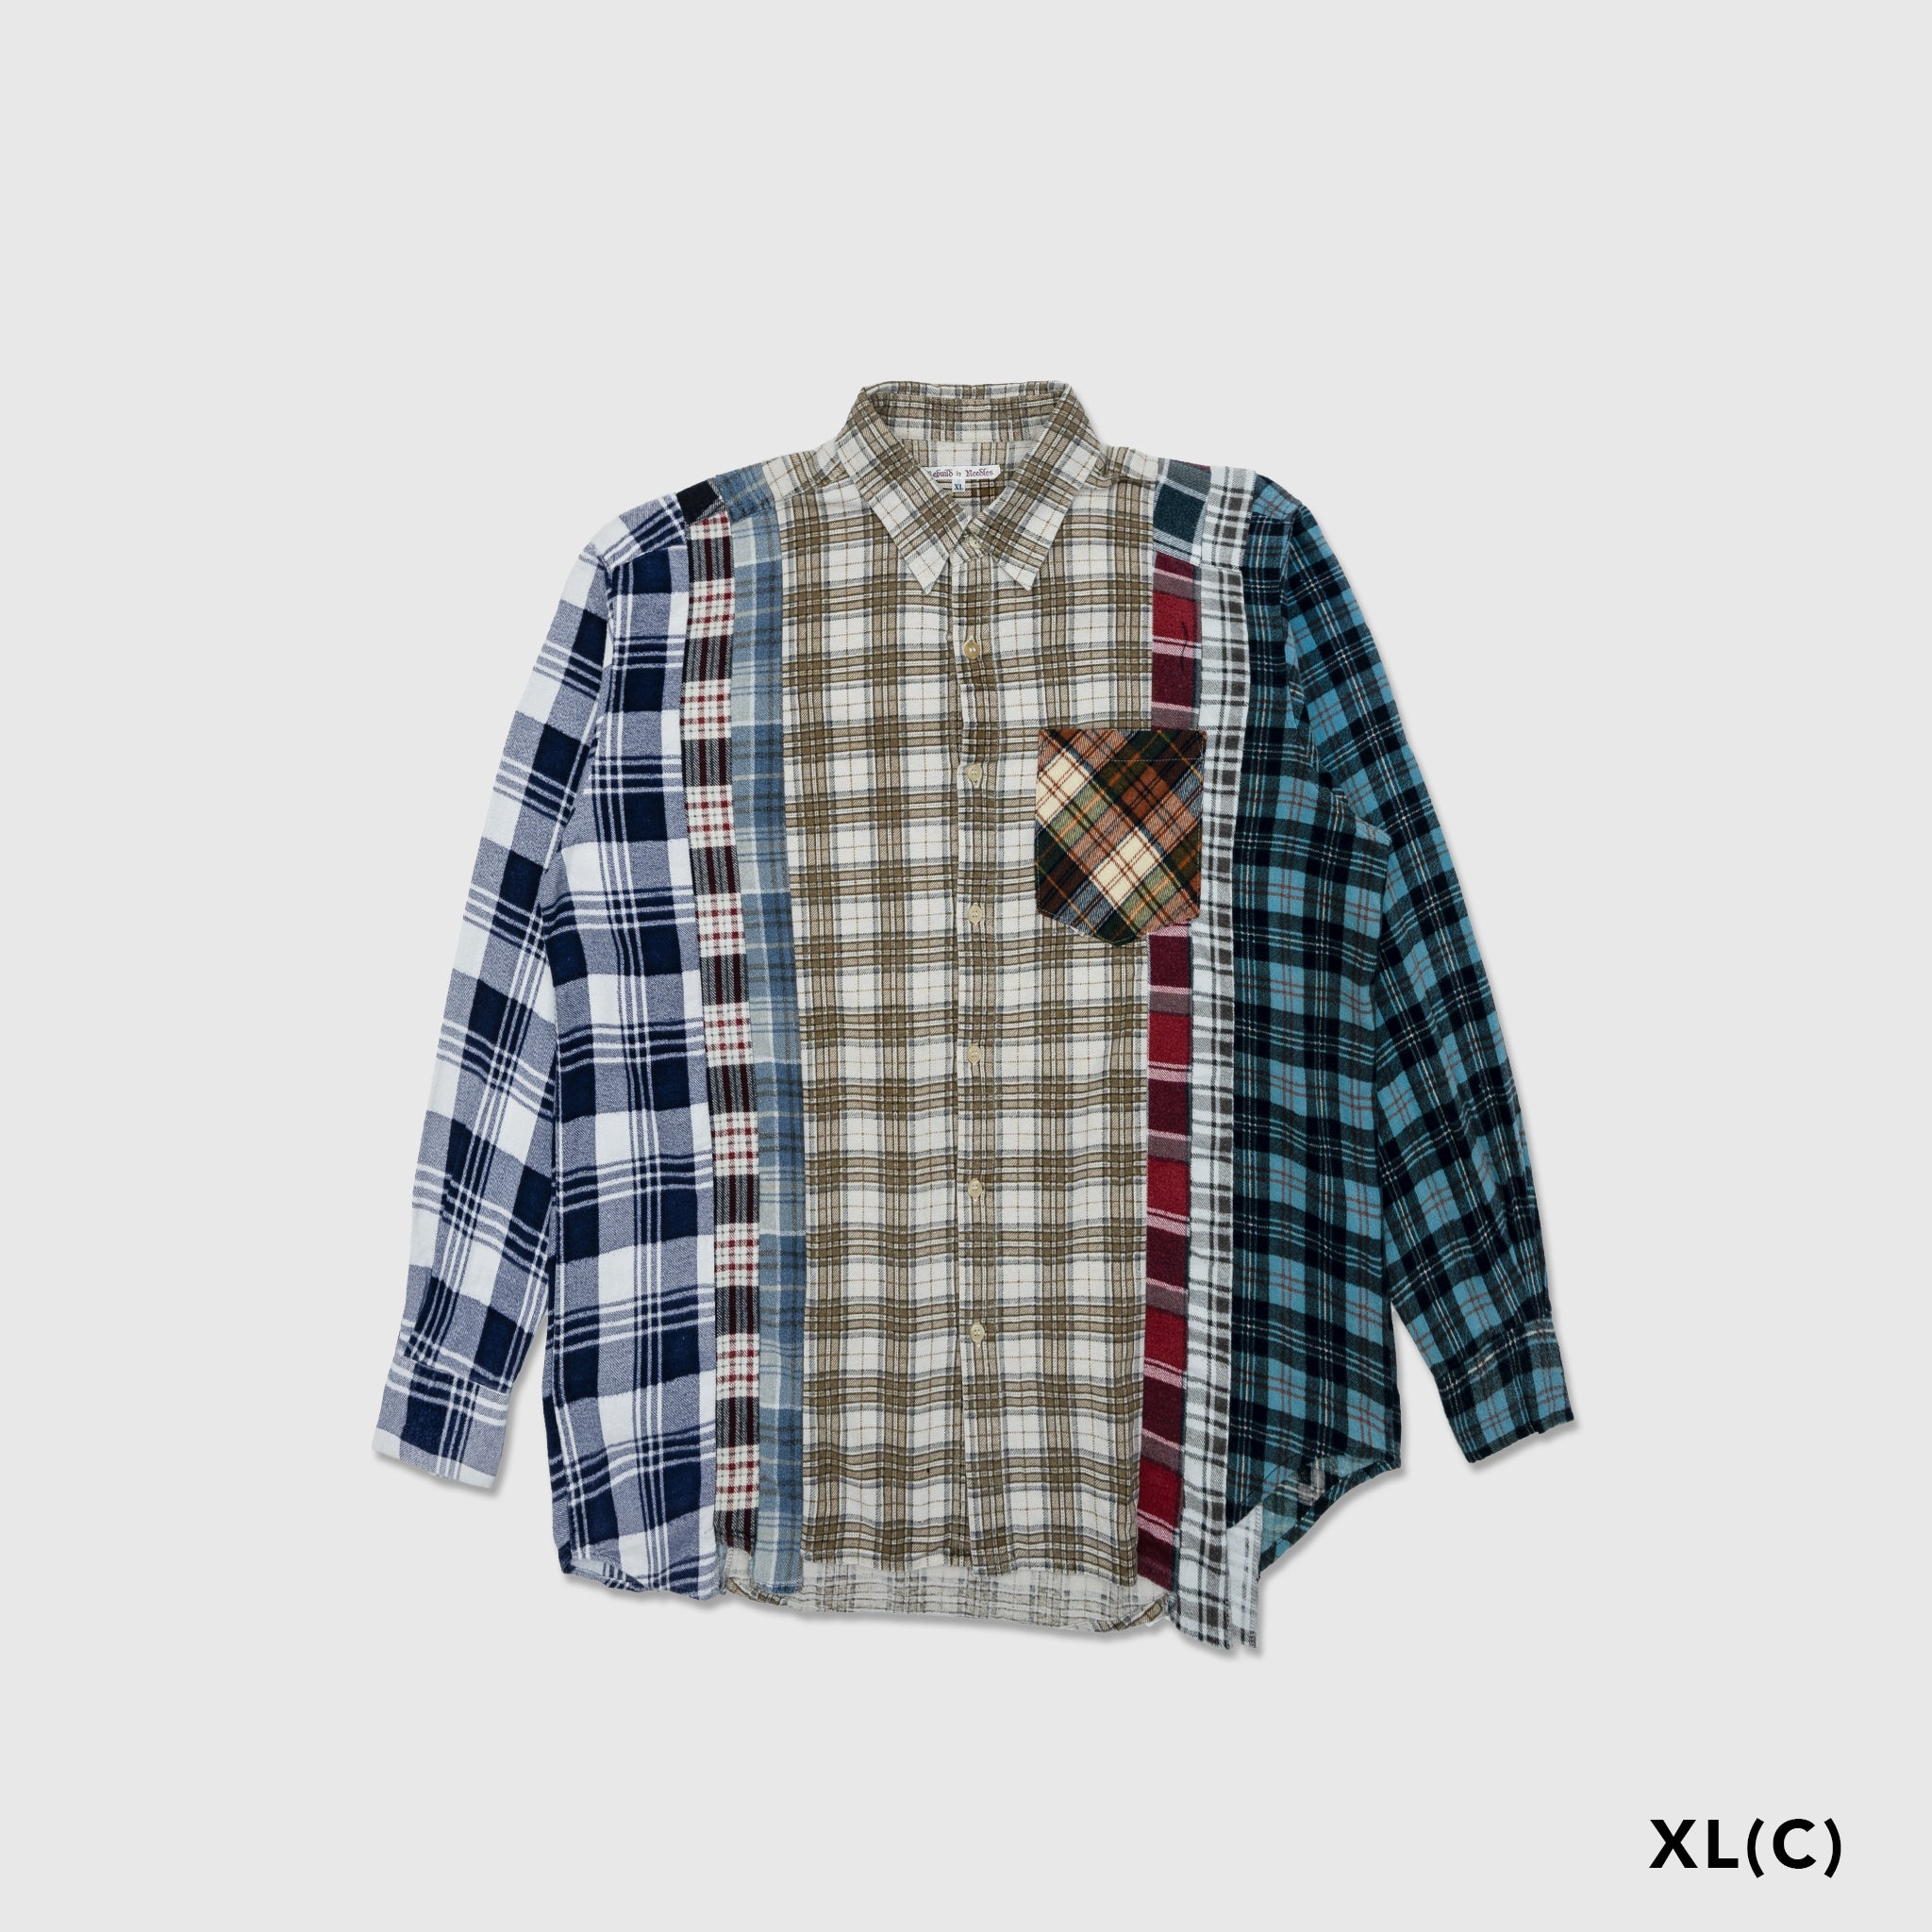 REBUILD BY NEEDLES 7 CUTS FLANNEL SHIRT